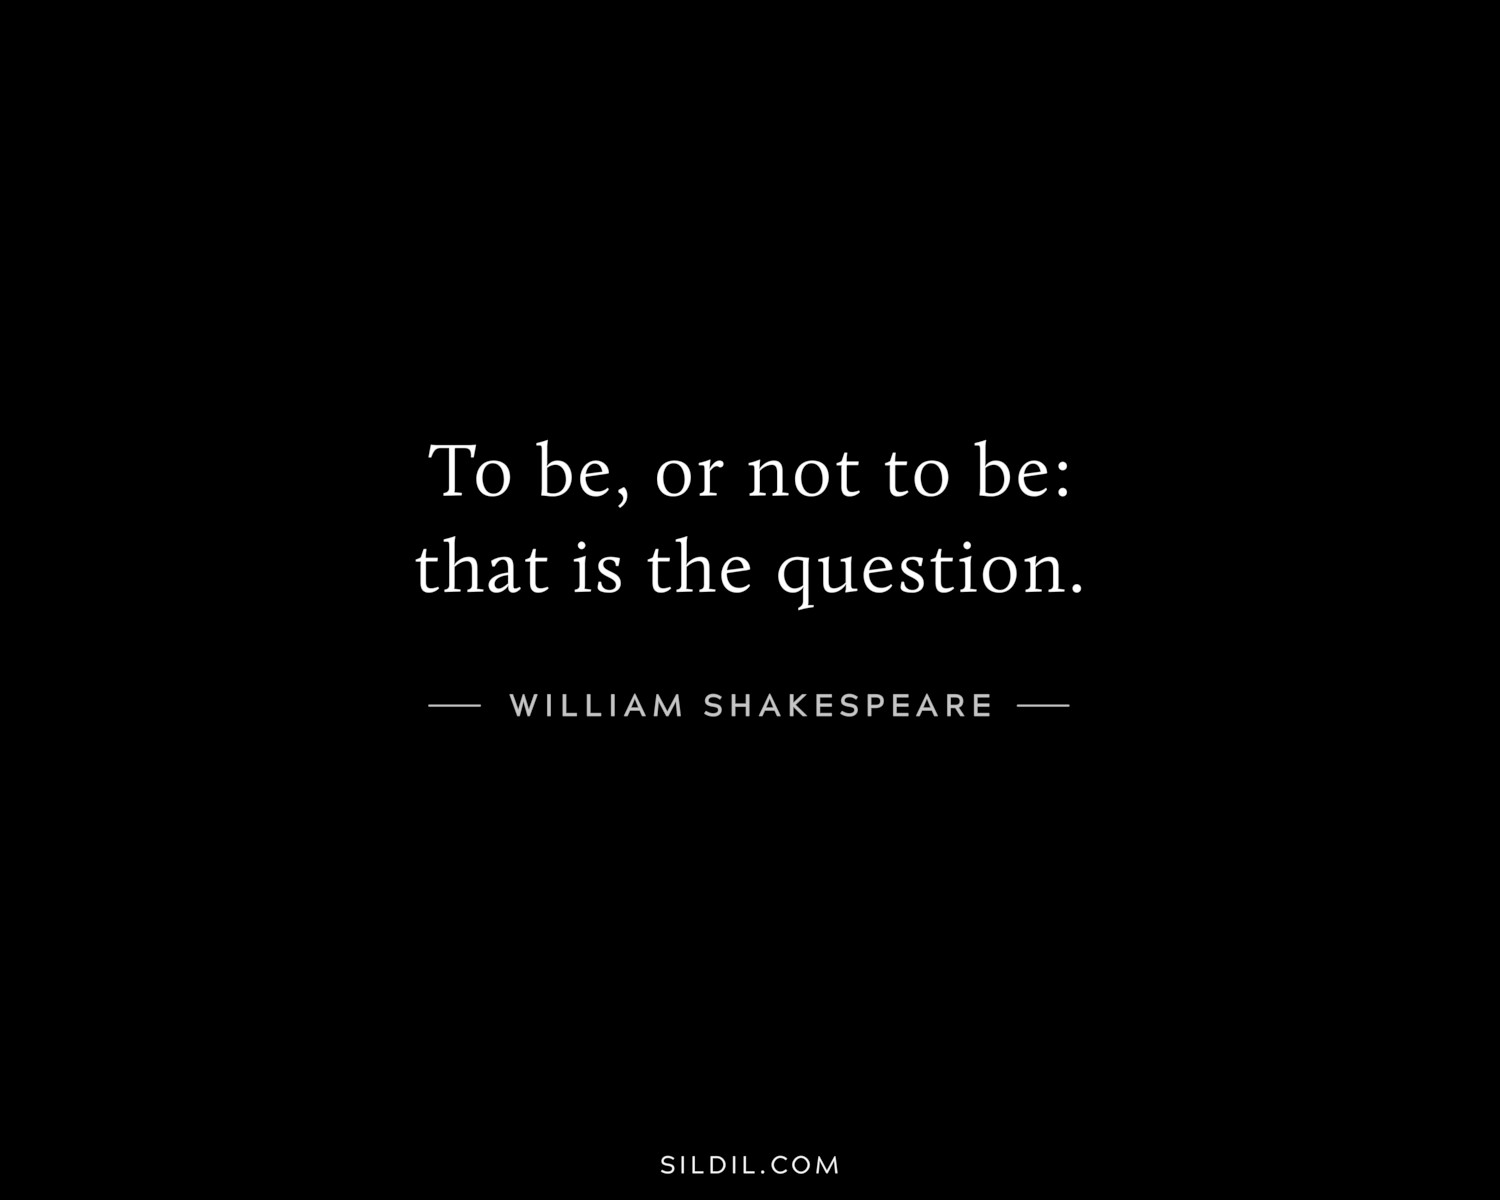 To be, or not to be: that is the question.